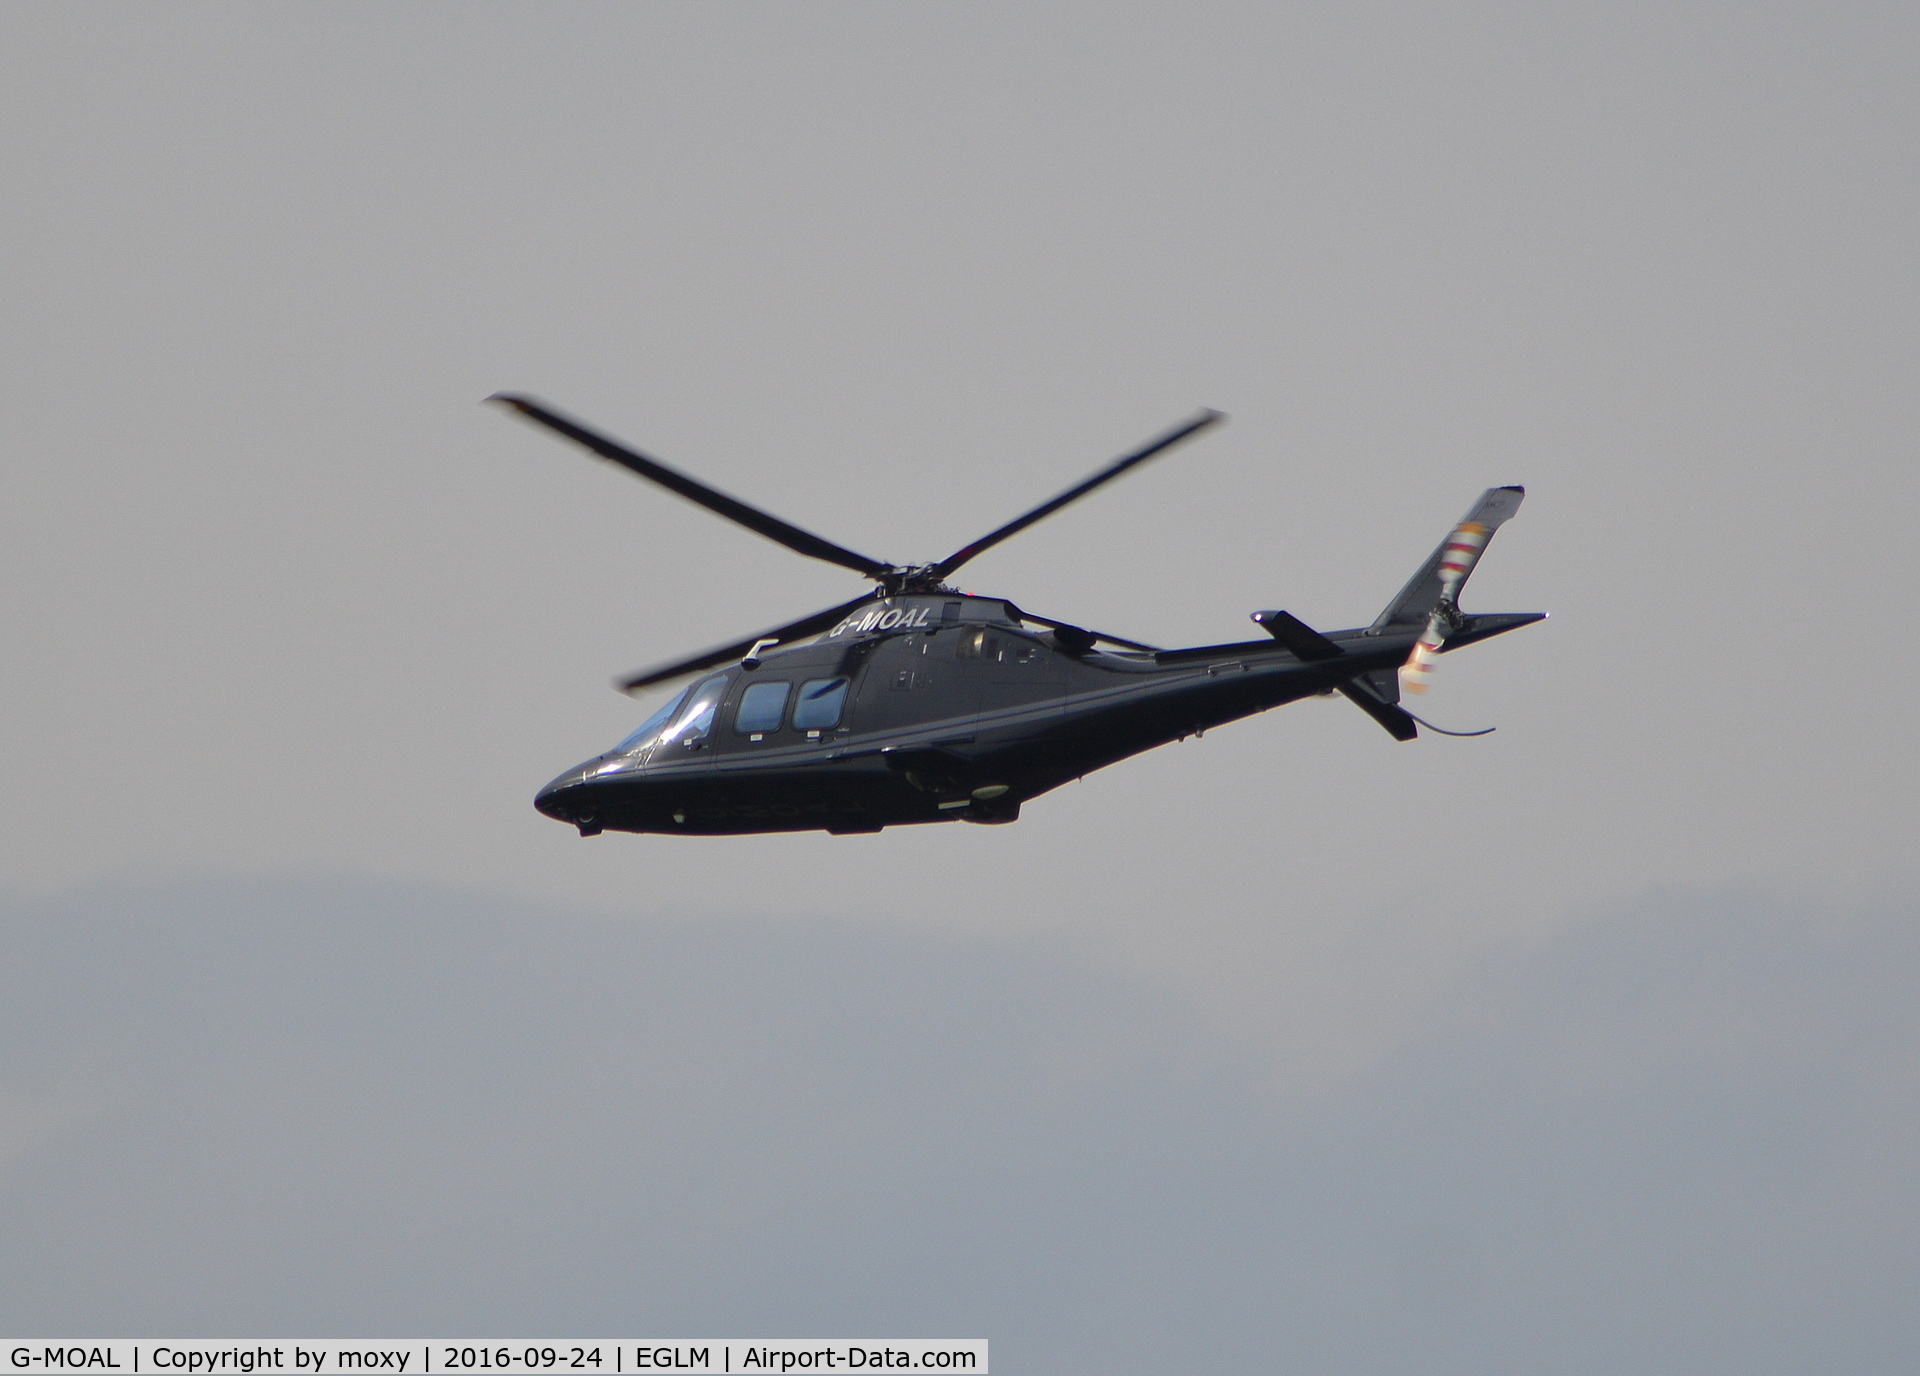 G-MOAL, 2015 AgustaWestland AW-109SP Grand New C/N 22348, Agusta Westland AW-109SP Grand New departing White Waltham after refuelling.